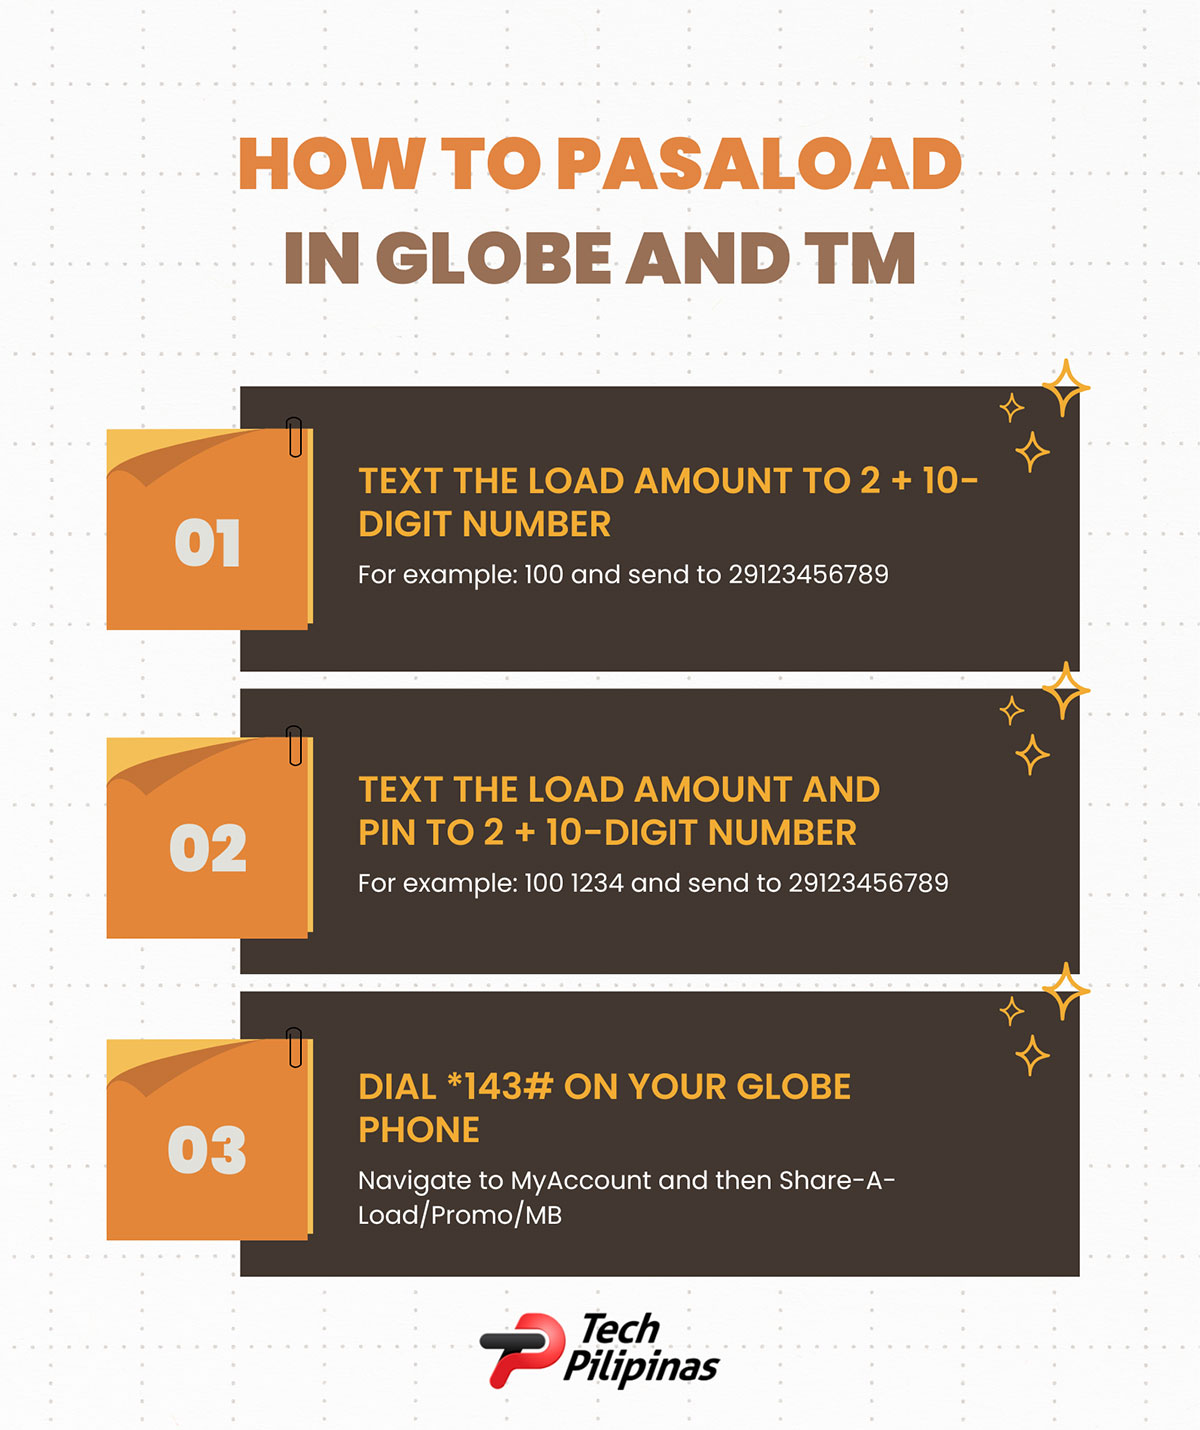 How to pasaload in Globe and TM